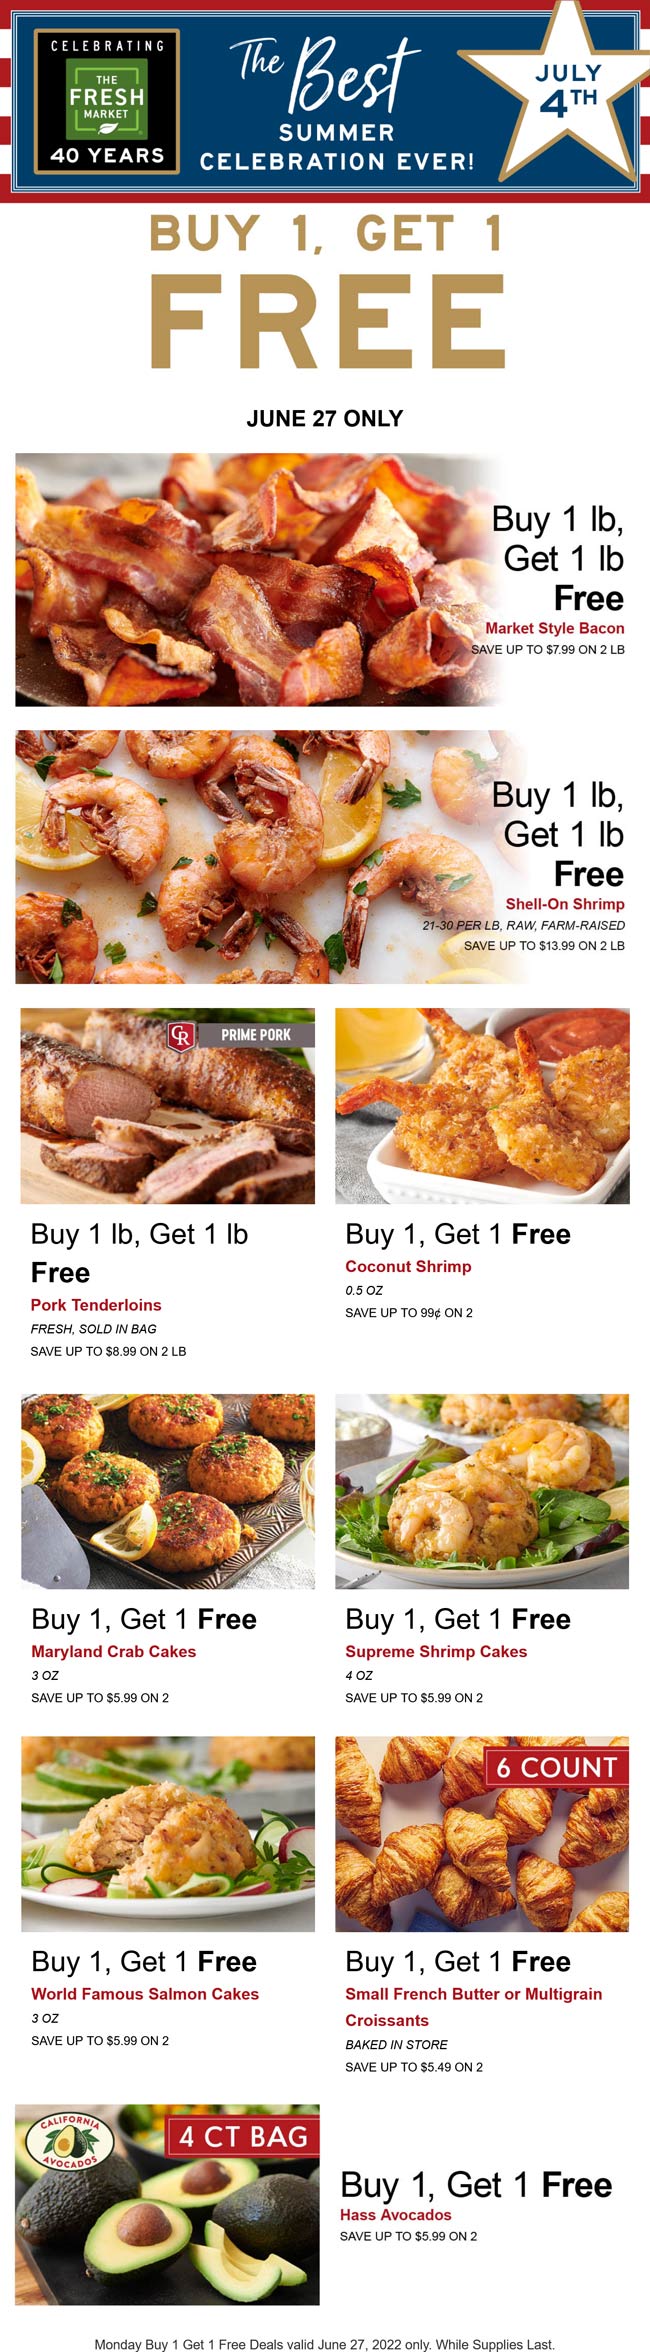 The Fresh Market stores Coupon  Second bacon free & more today at The Fresh Market #thefreshmarket 